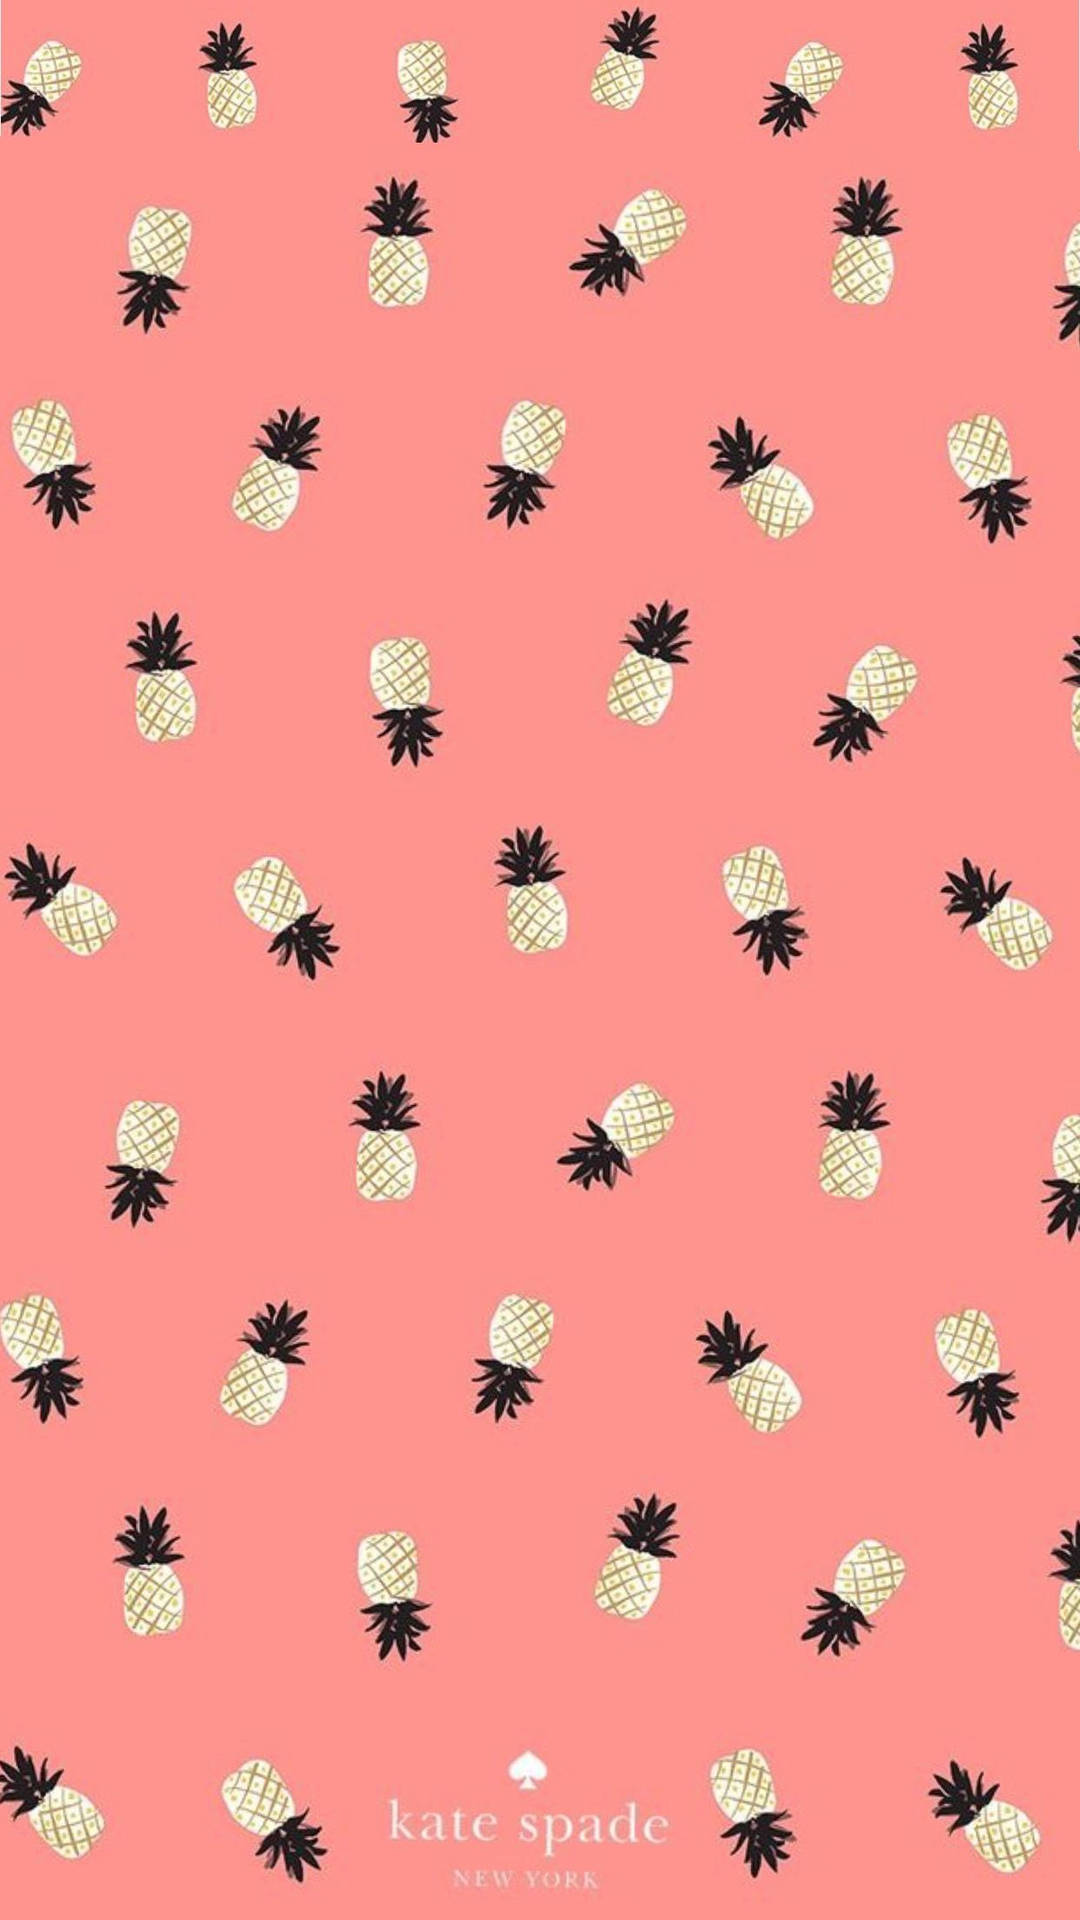 Kate Spade Pineapple Poster Background